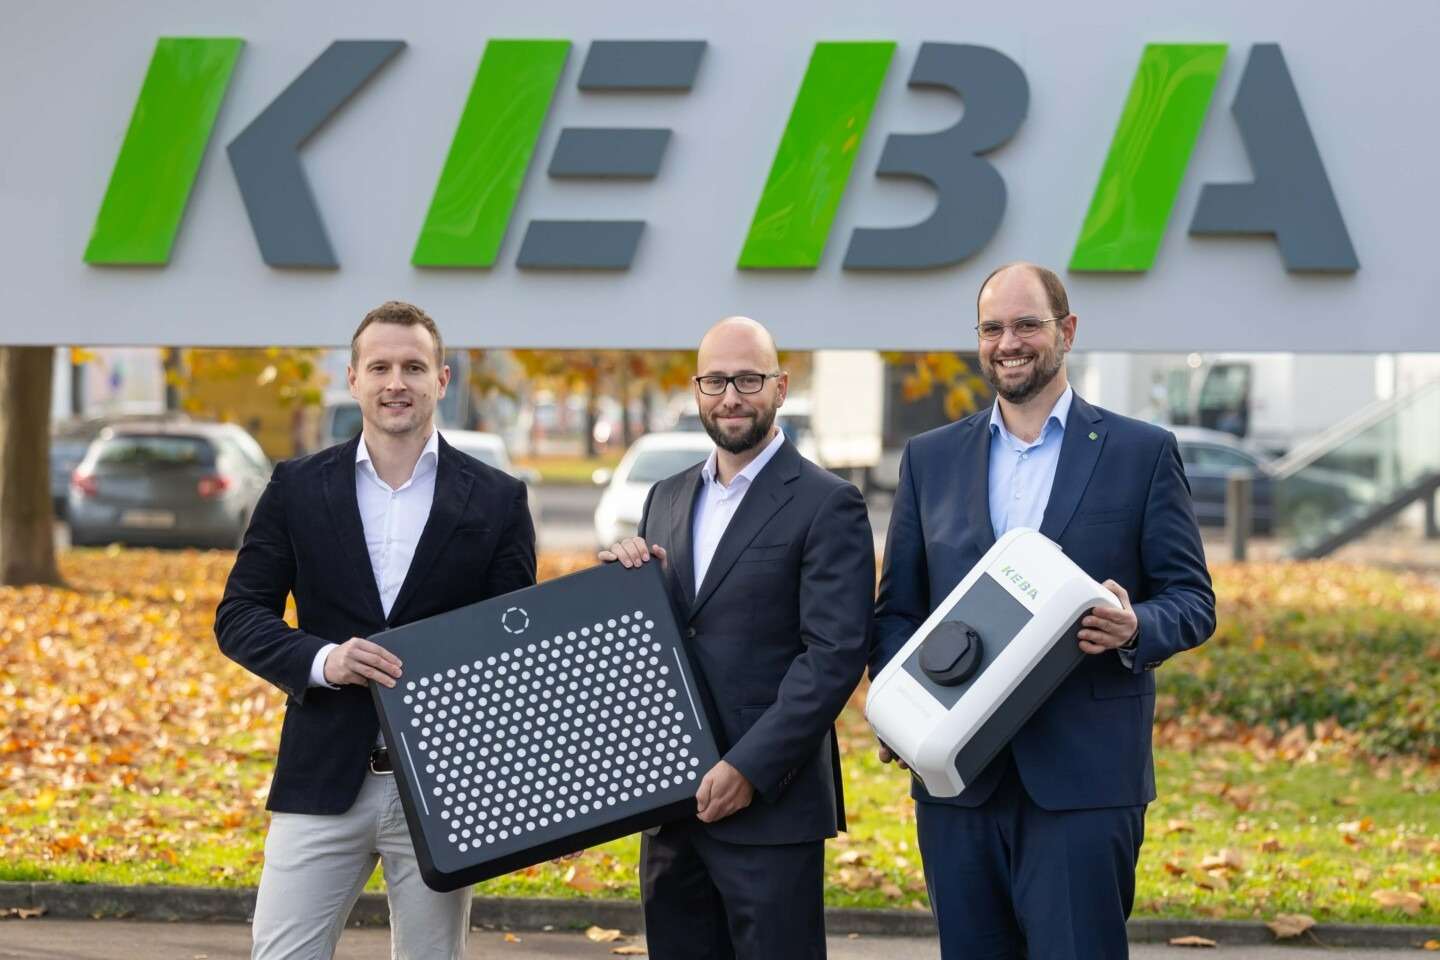 Easelink and KEBA announce a partnership to automate charging for EVs at home